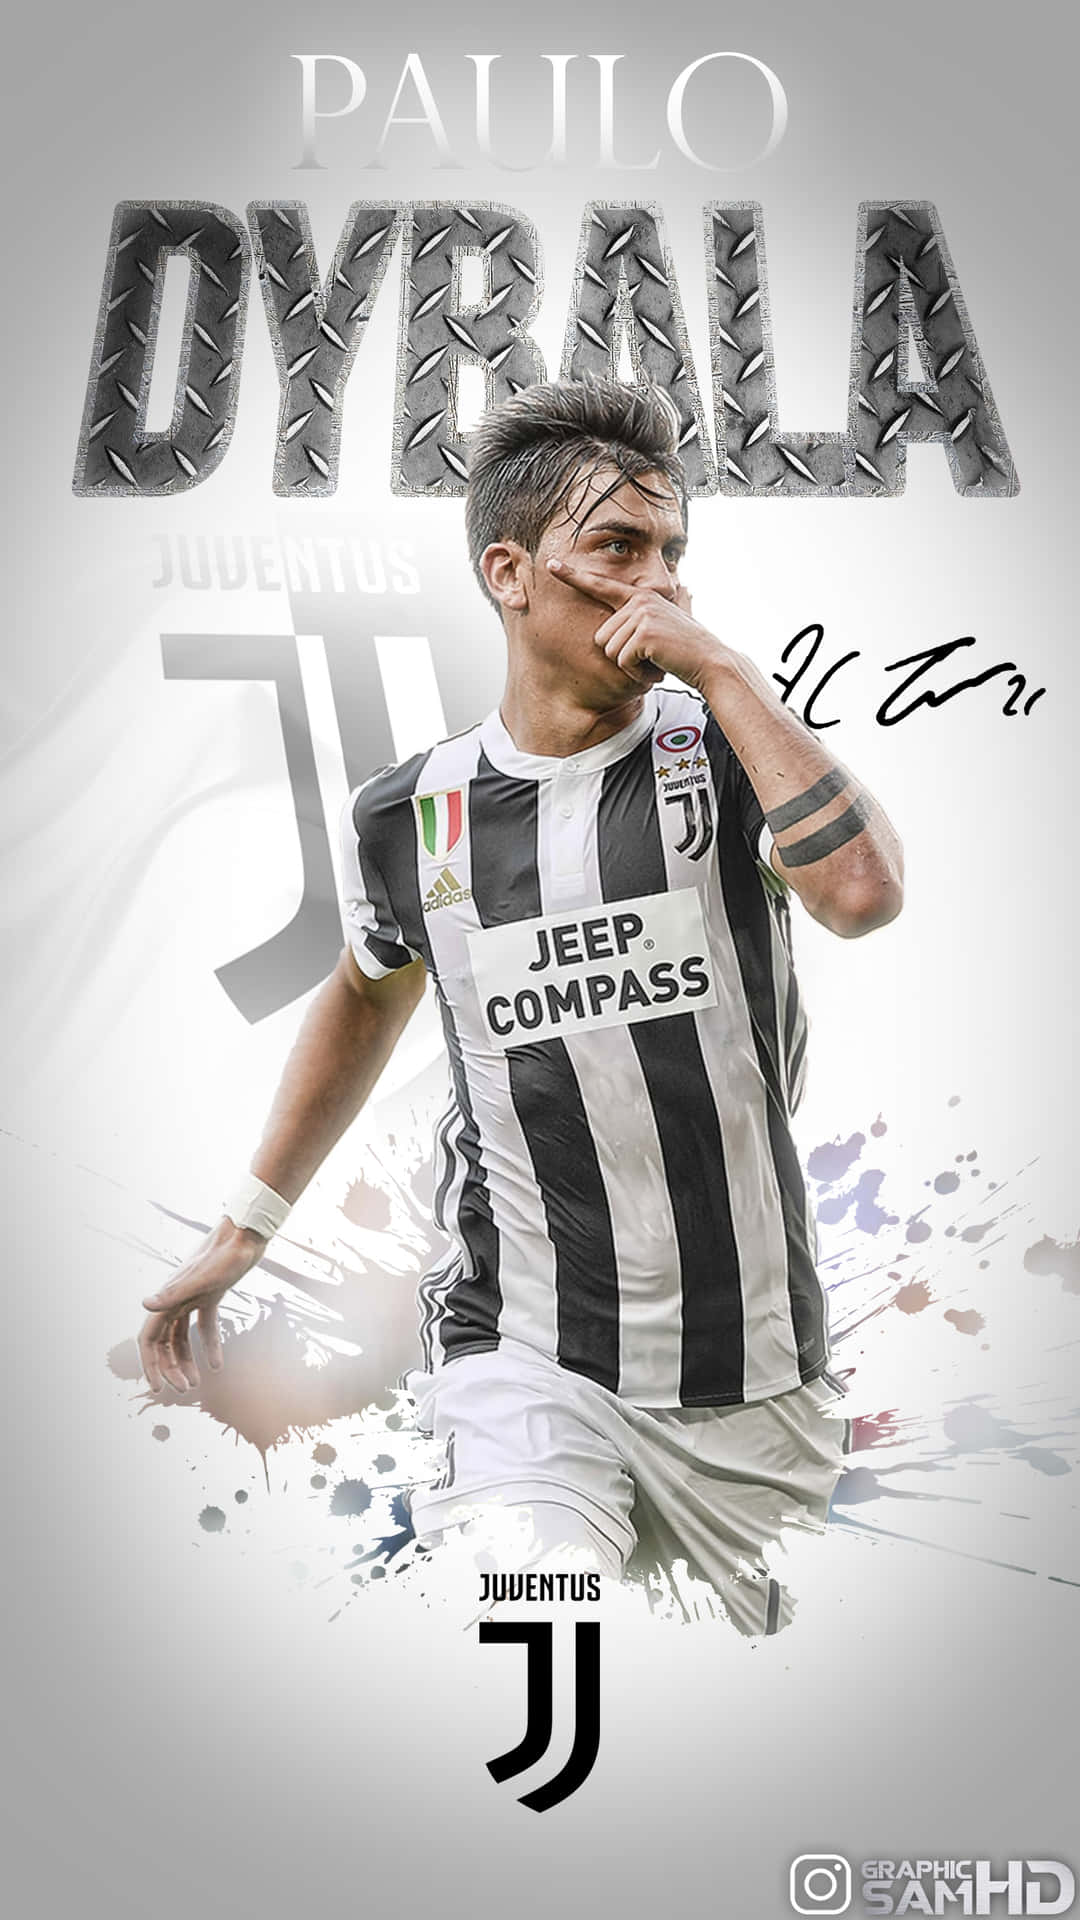 Caption: Paulo Dybala In Action - Incredible Moment On The Football Field Wallpaper